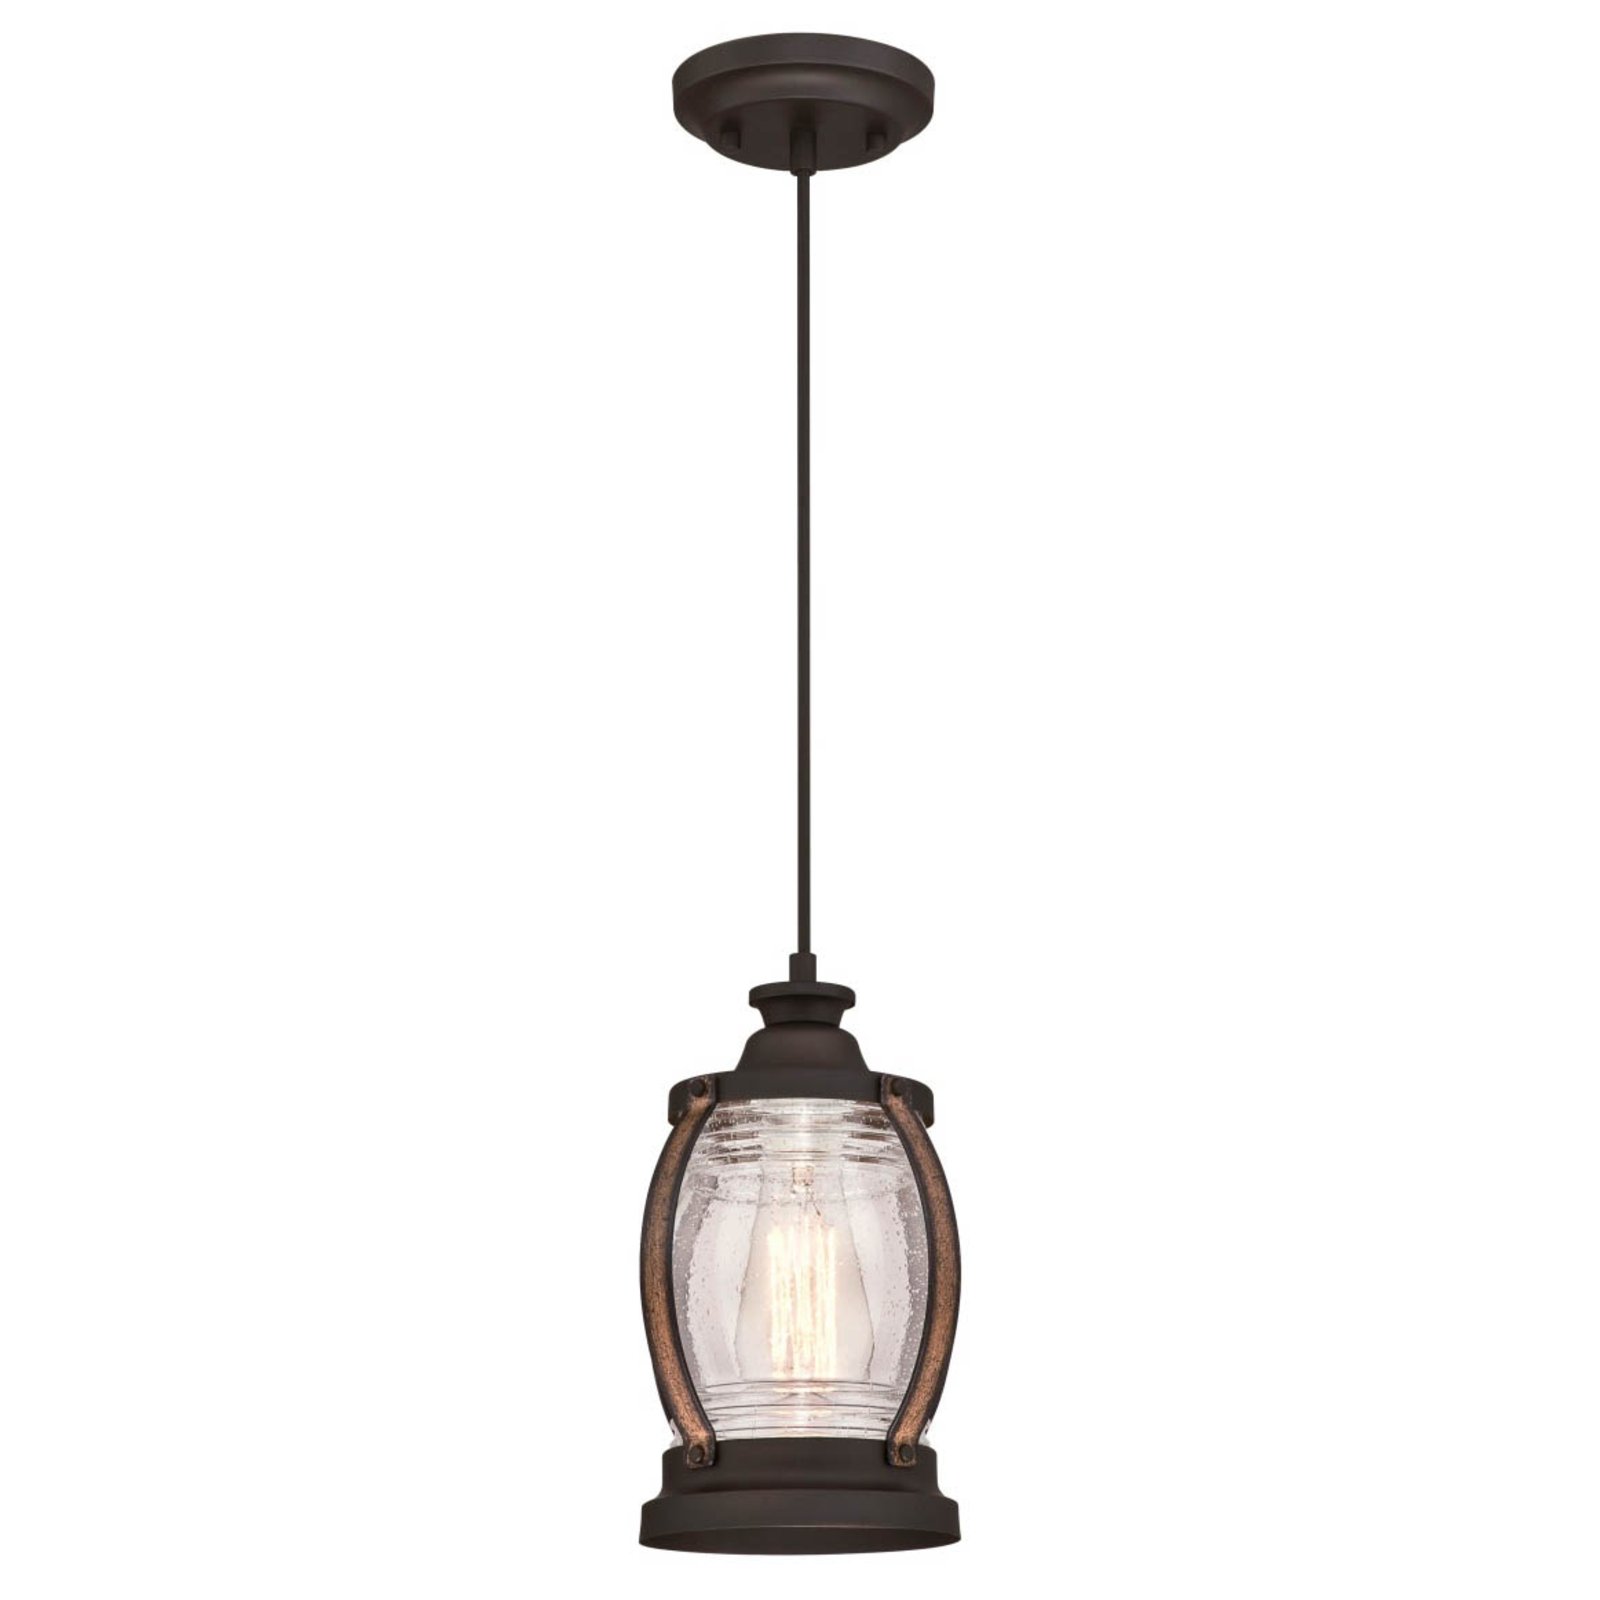 Westinghouse Canyon pendant light with antique glass